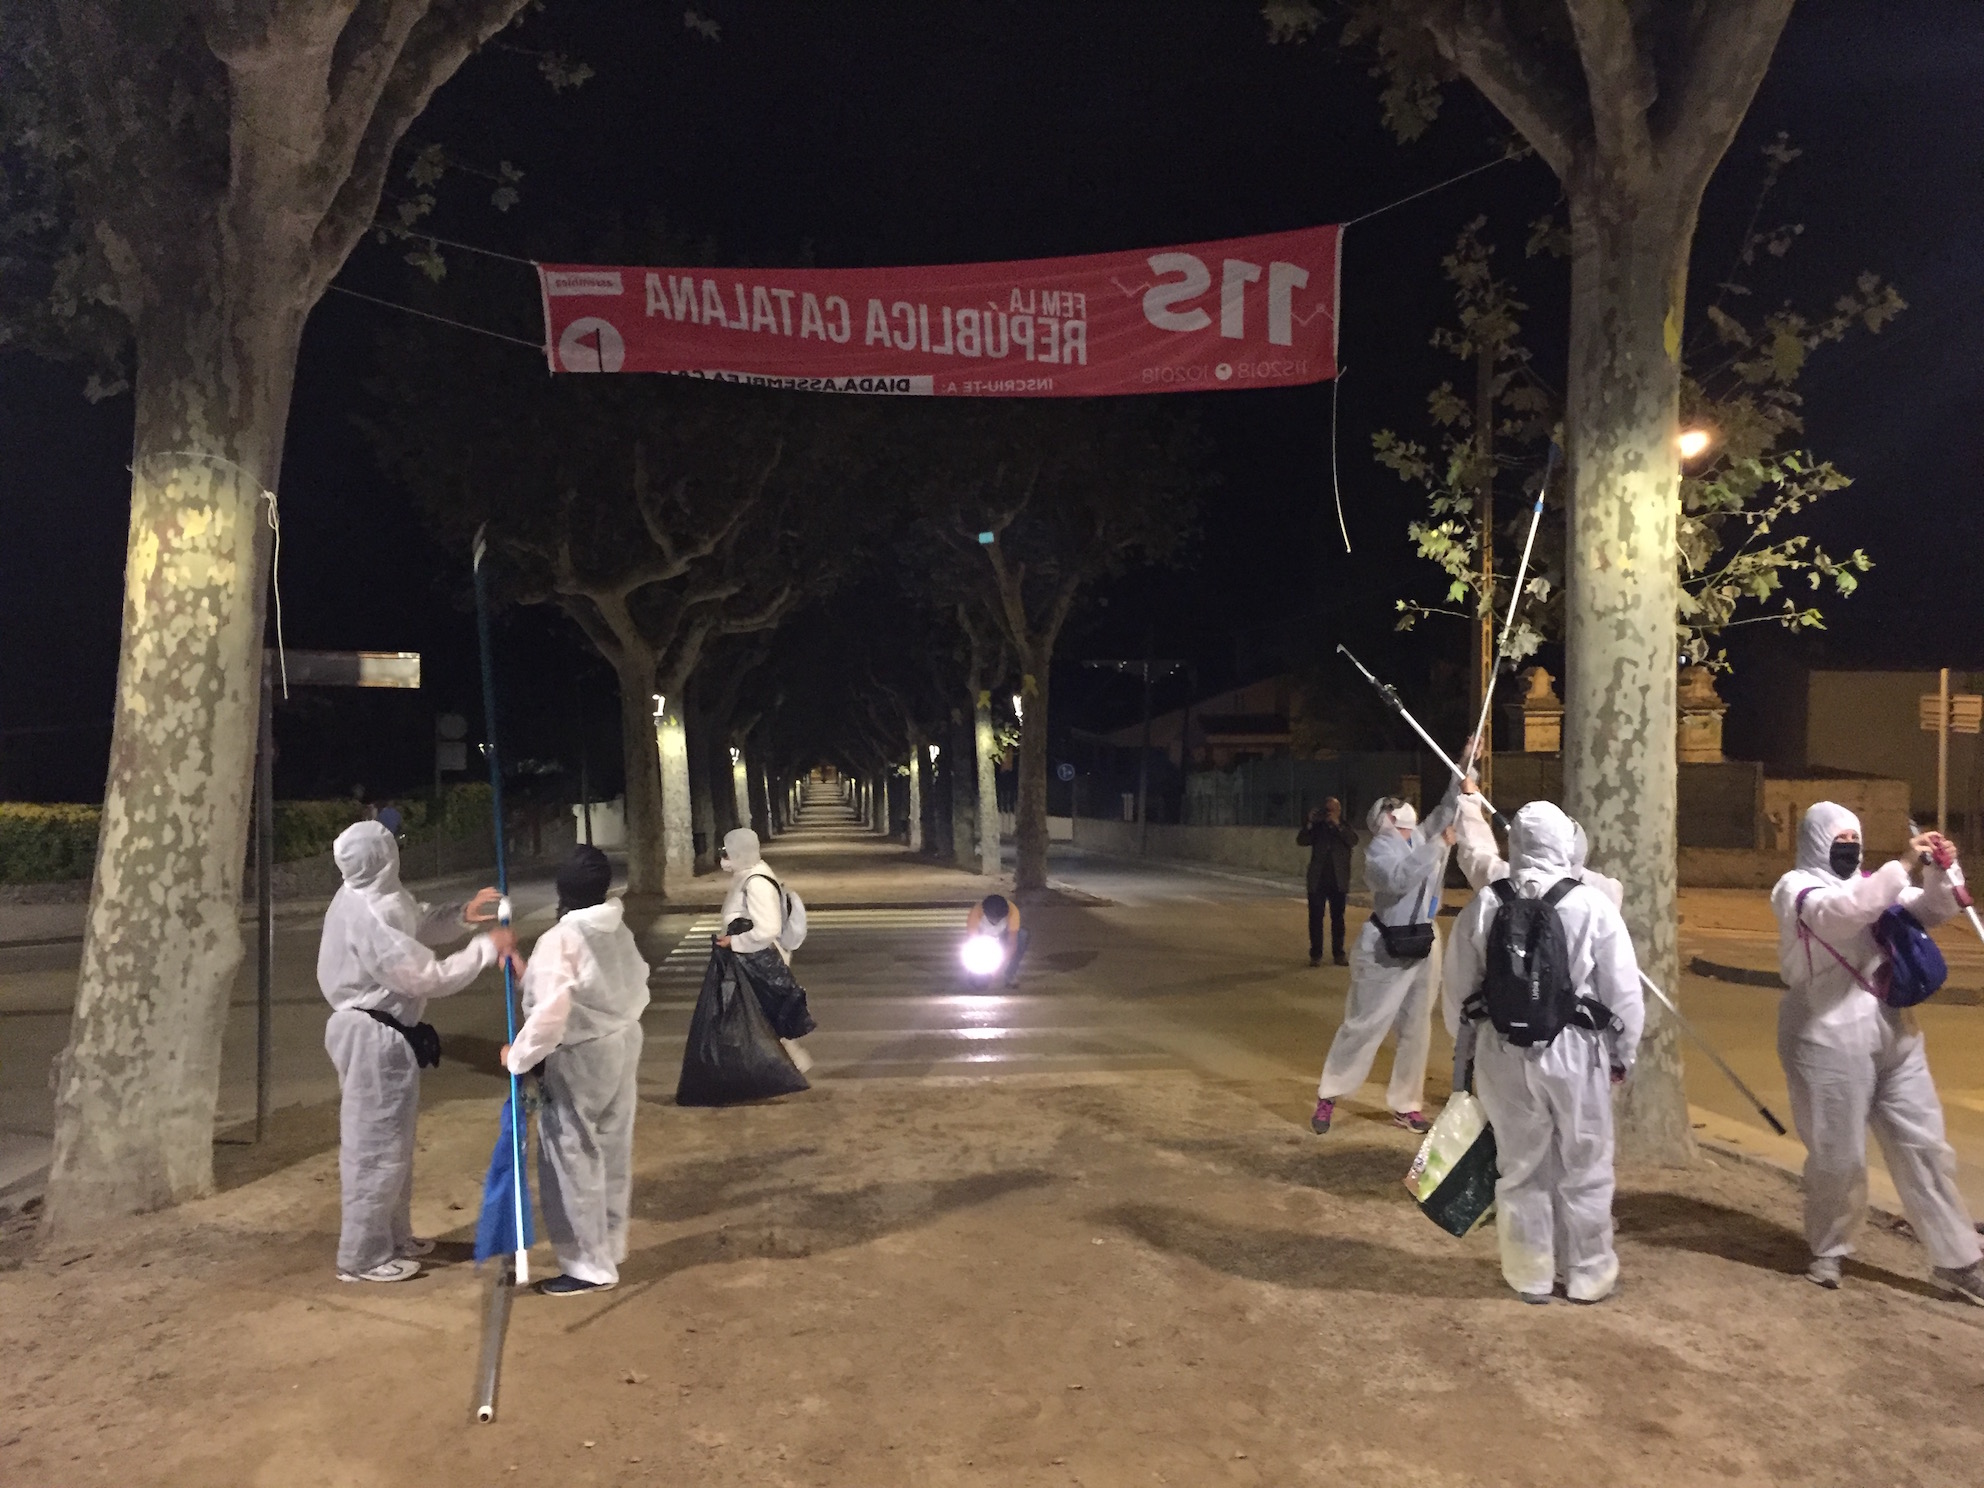 Unionist activists at work in Canet de Mar 4